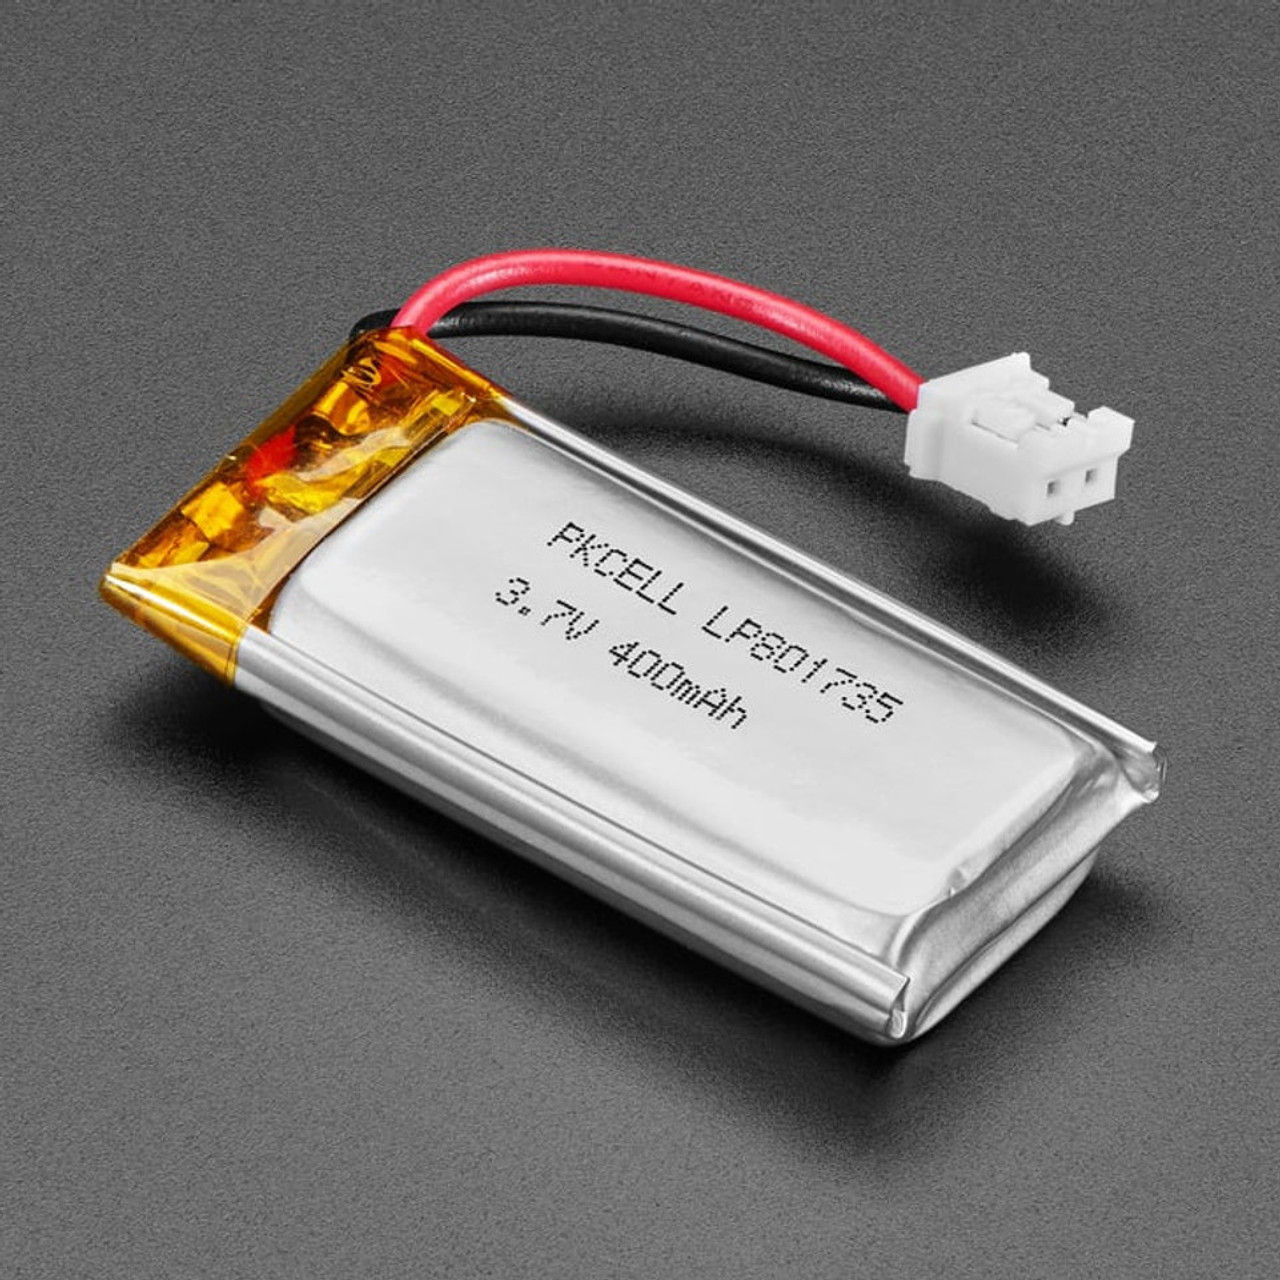 Lithium Ion Polymer Battery Ideal For Feathers - 3.7V 400mAh 